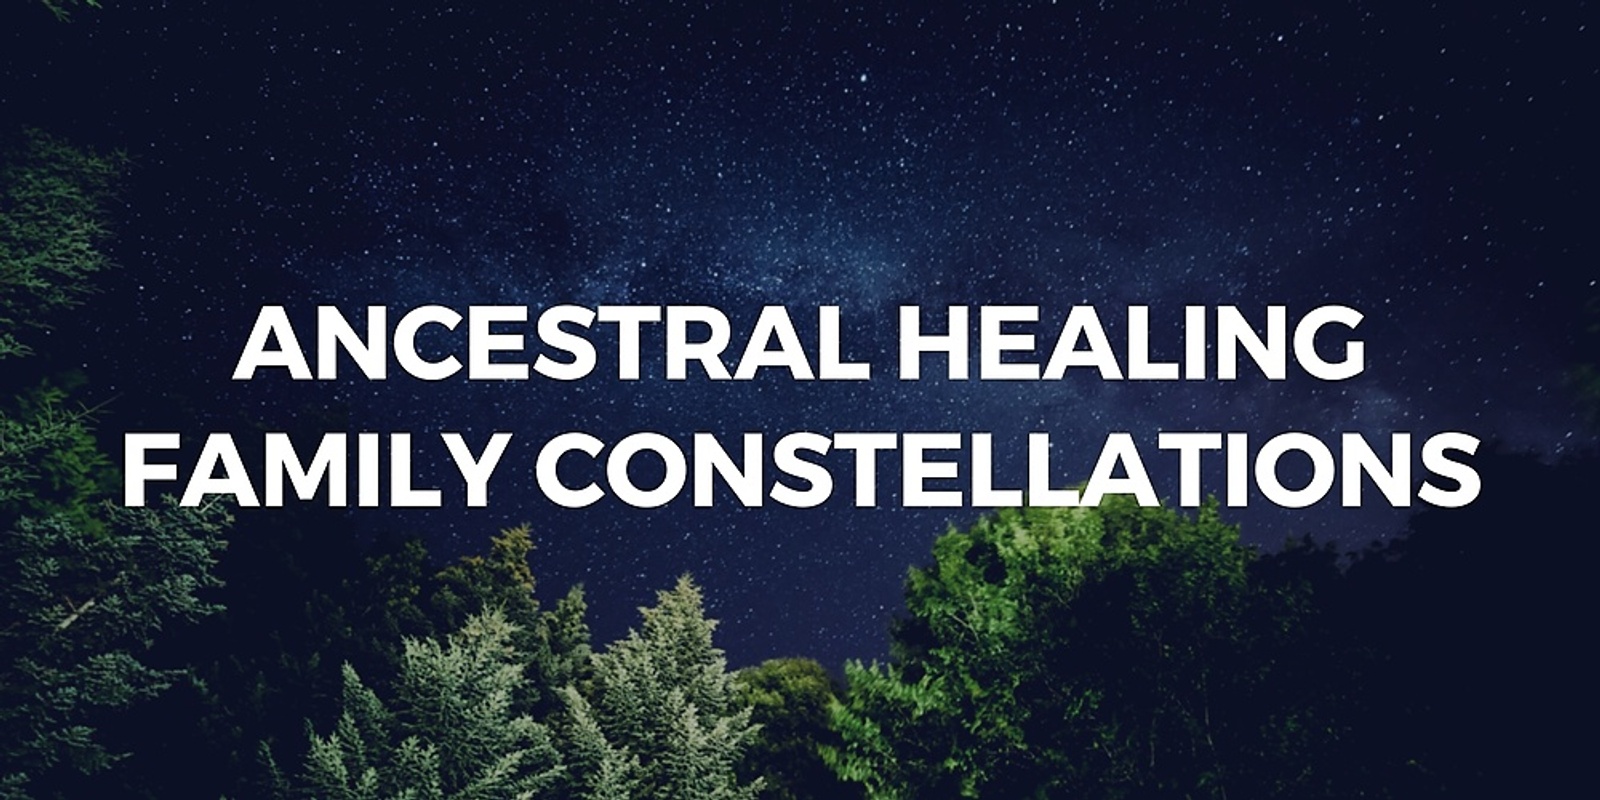 Ancestral healing - Family constellations